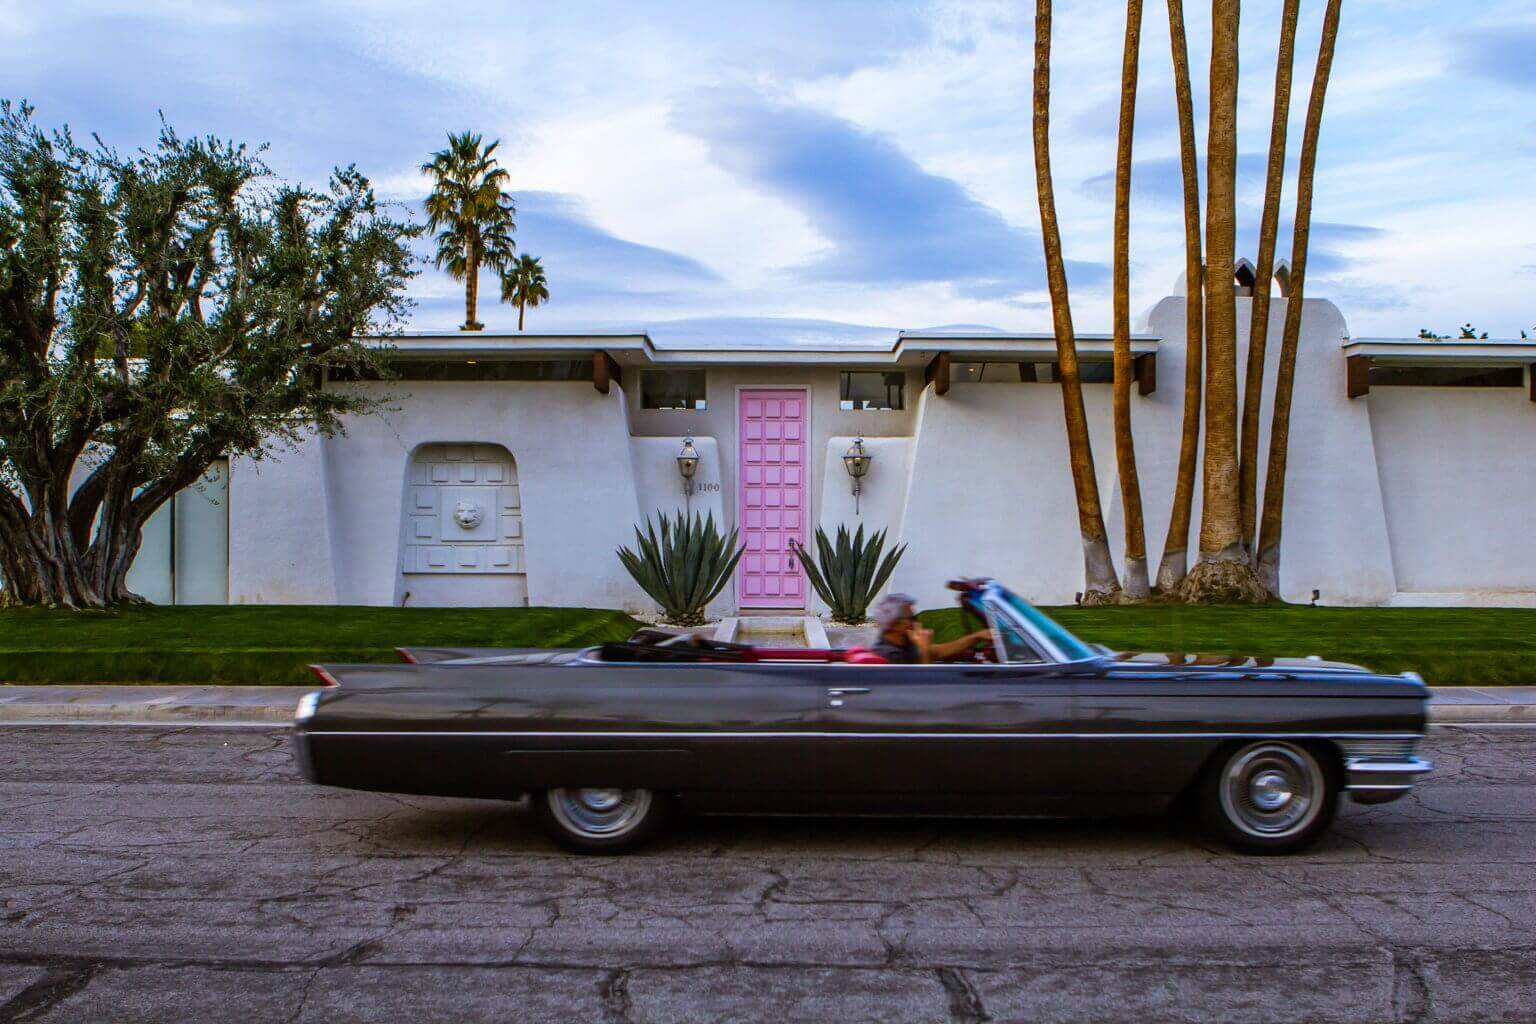 Man driving a classic car past the pink door house in Palm Springs California